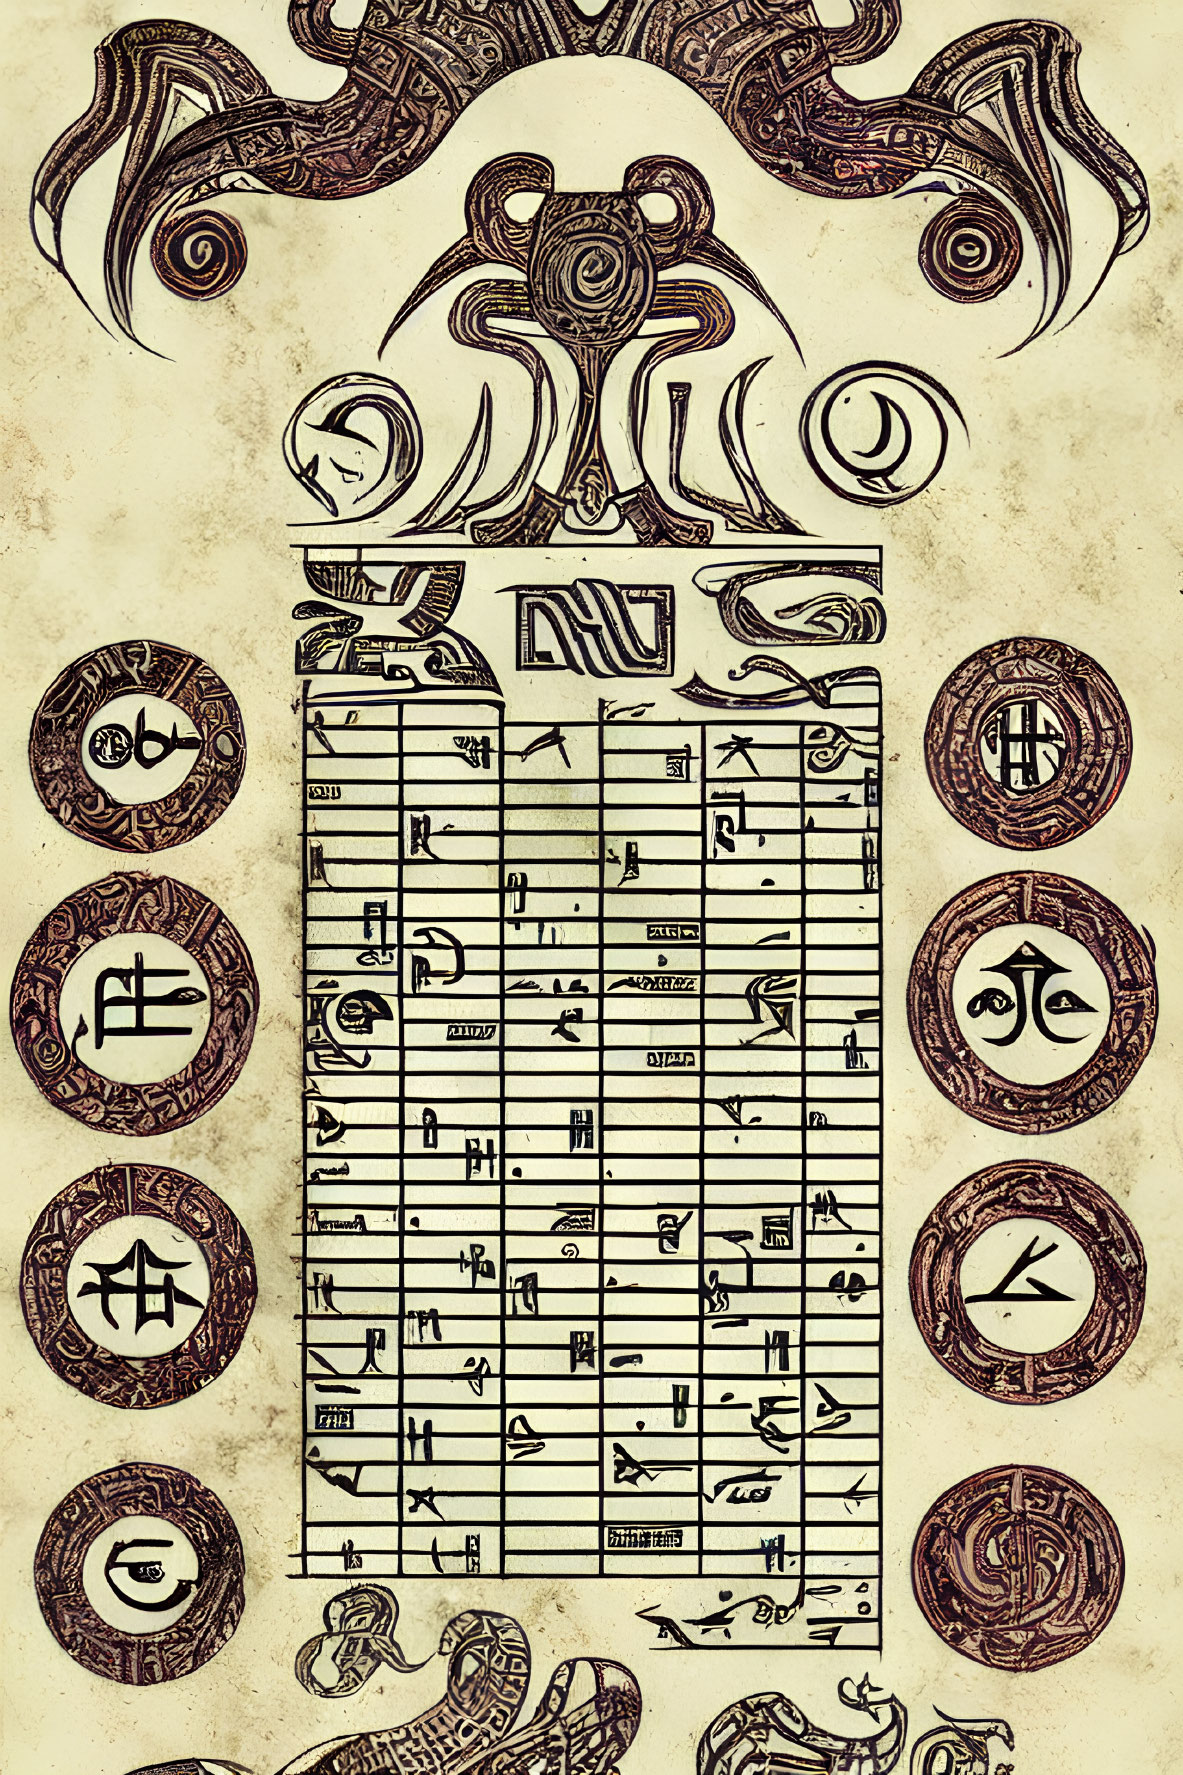 Vintage musical staff with alchemical symbols and cephalopod motif